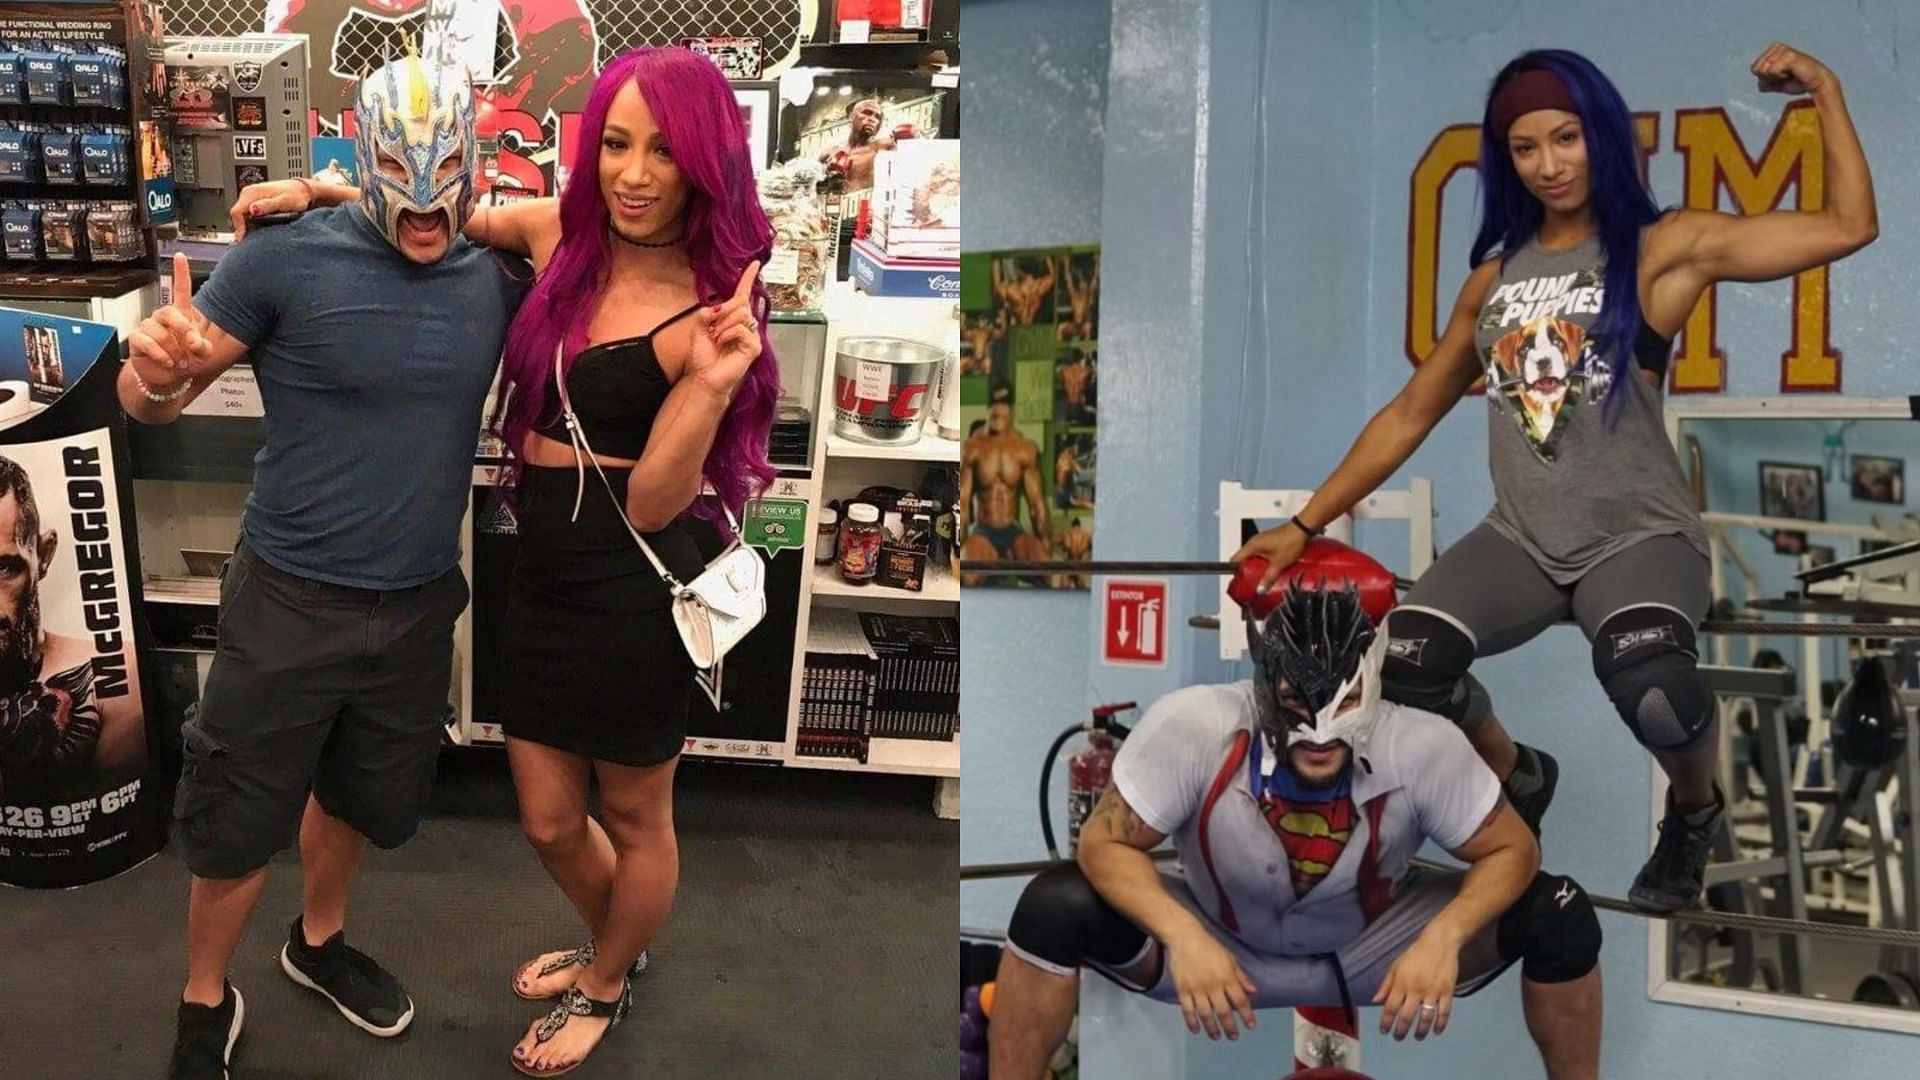 Sasha Banks and Samuray Del Sol are best friends in real life